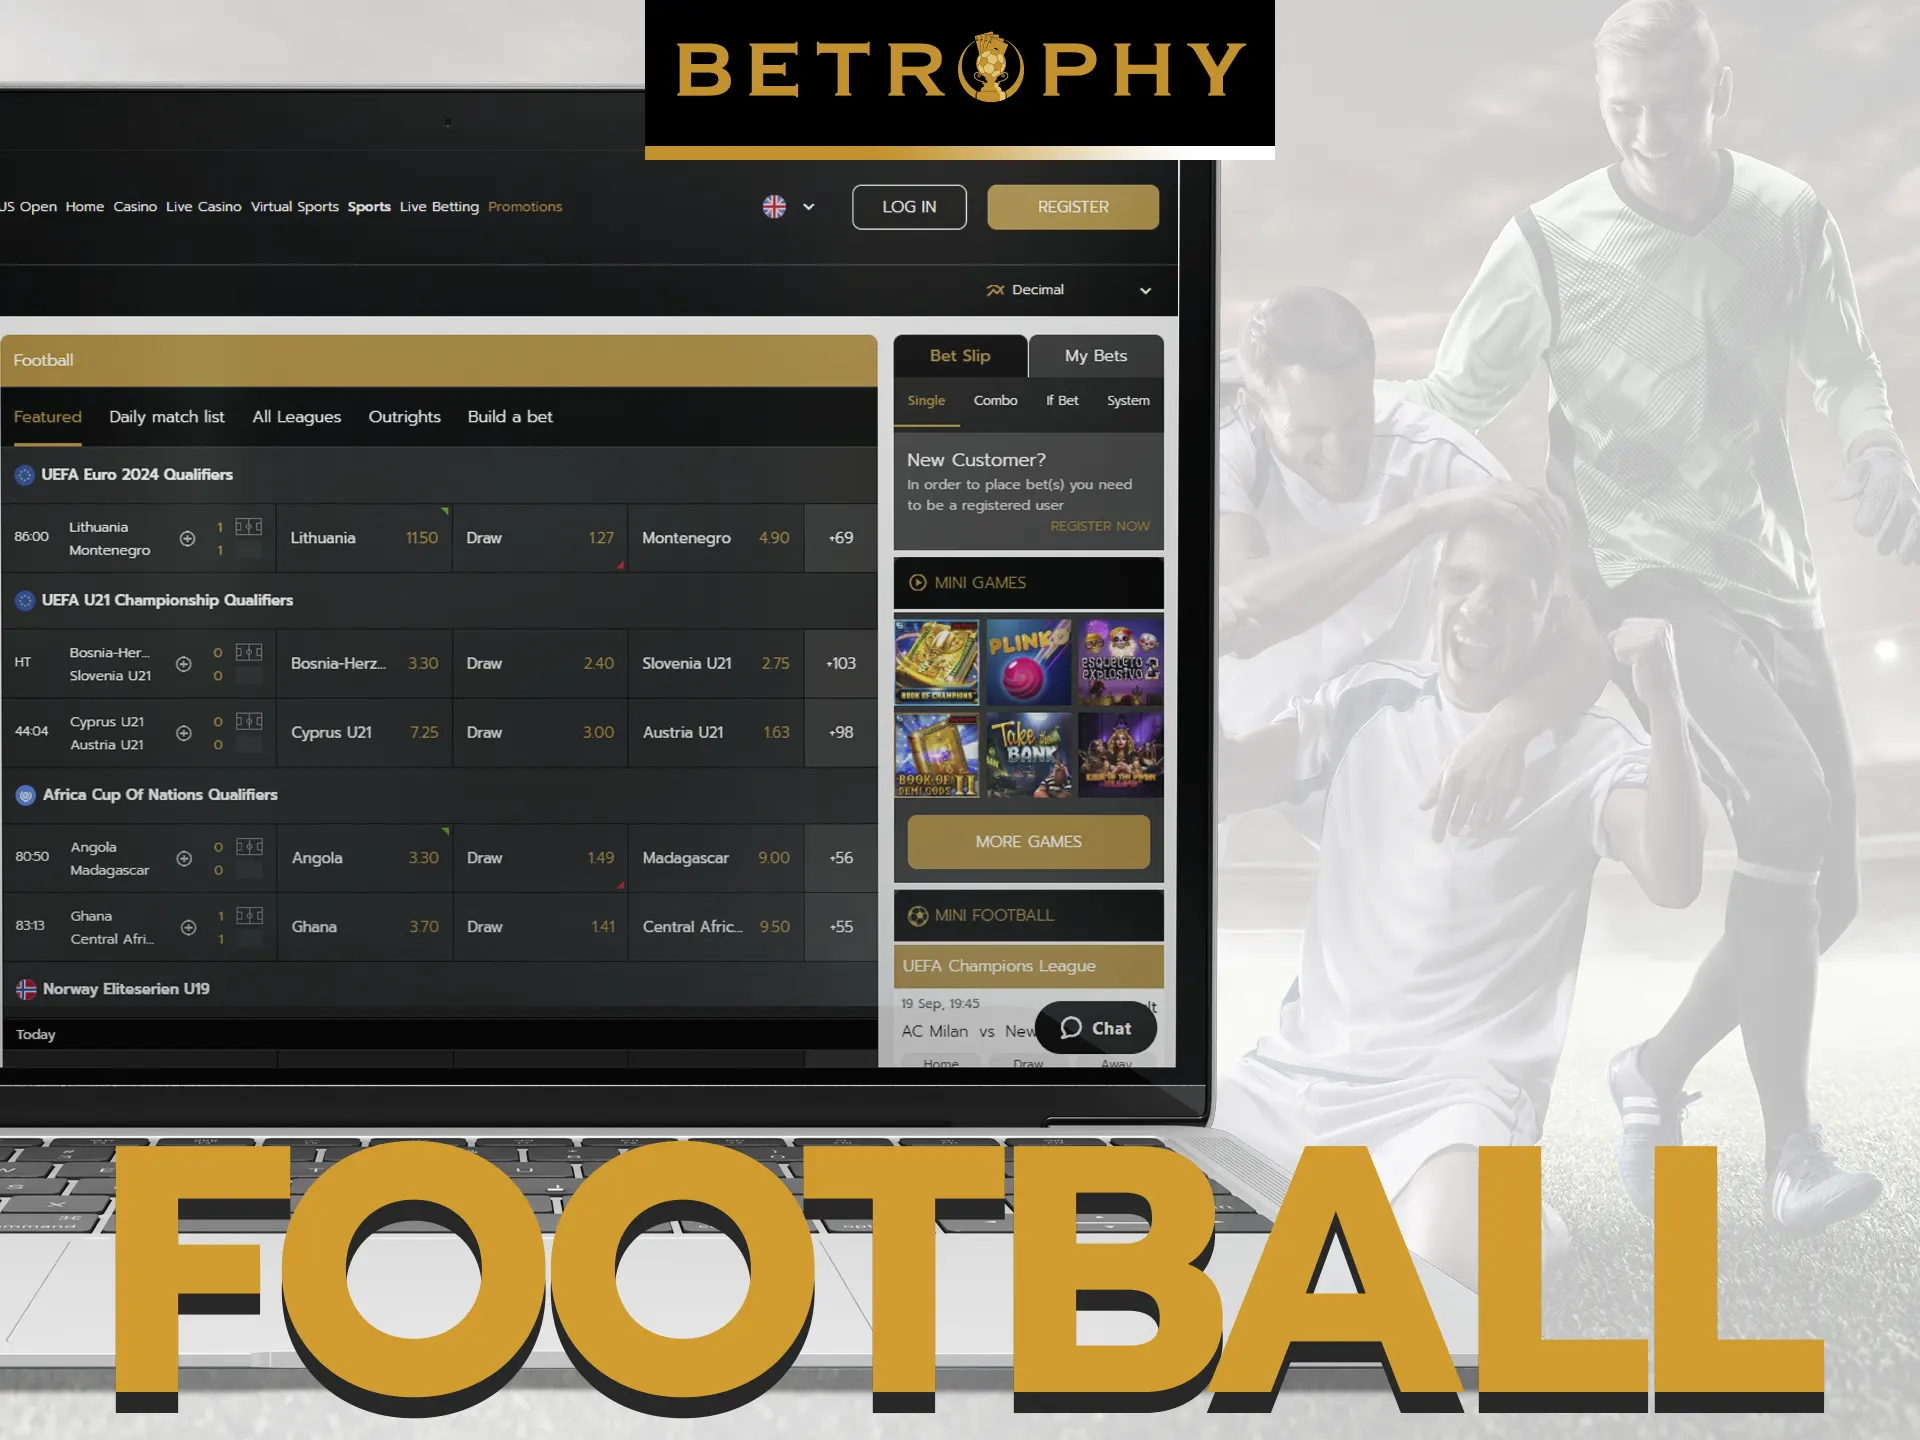 Bet on football with Betrophy.